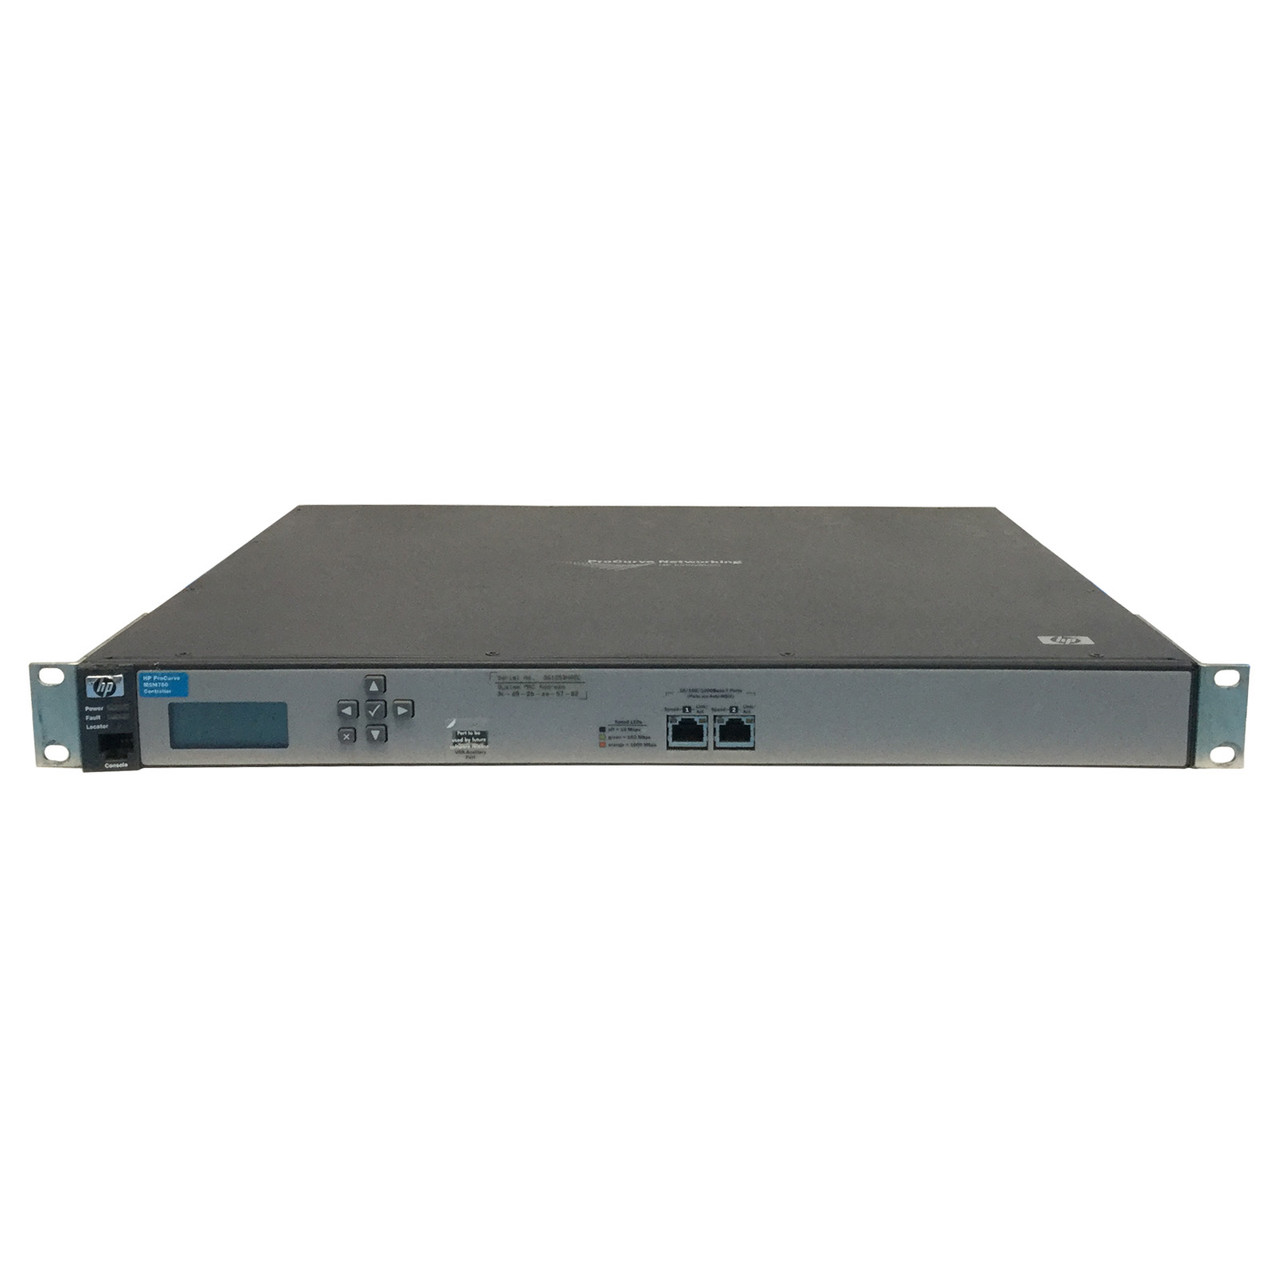 HPe J9420A MSM760 Mobility Controller 5070-6579